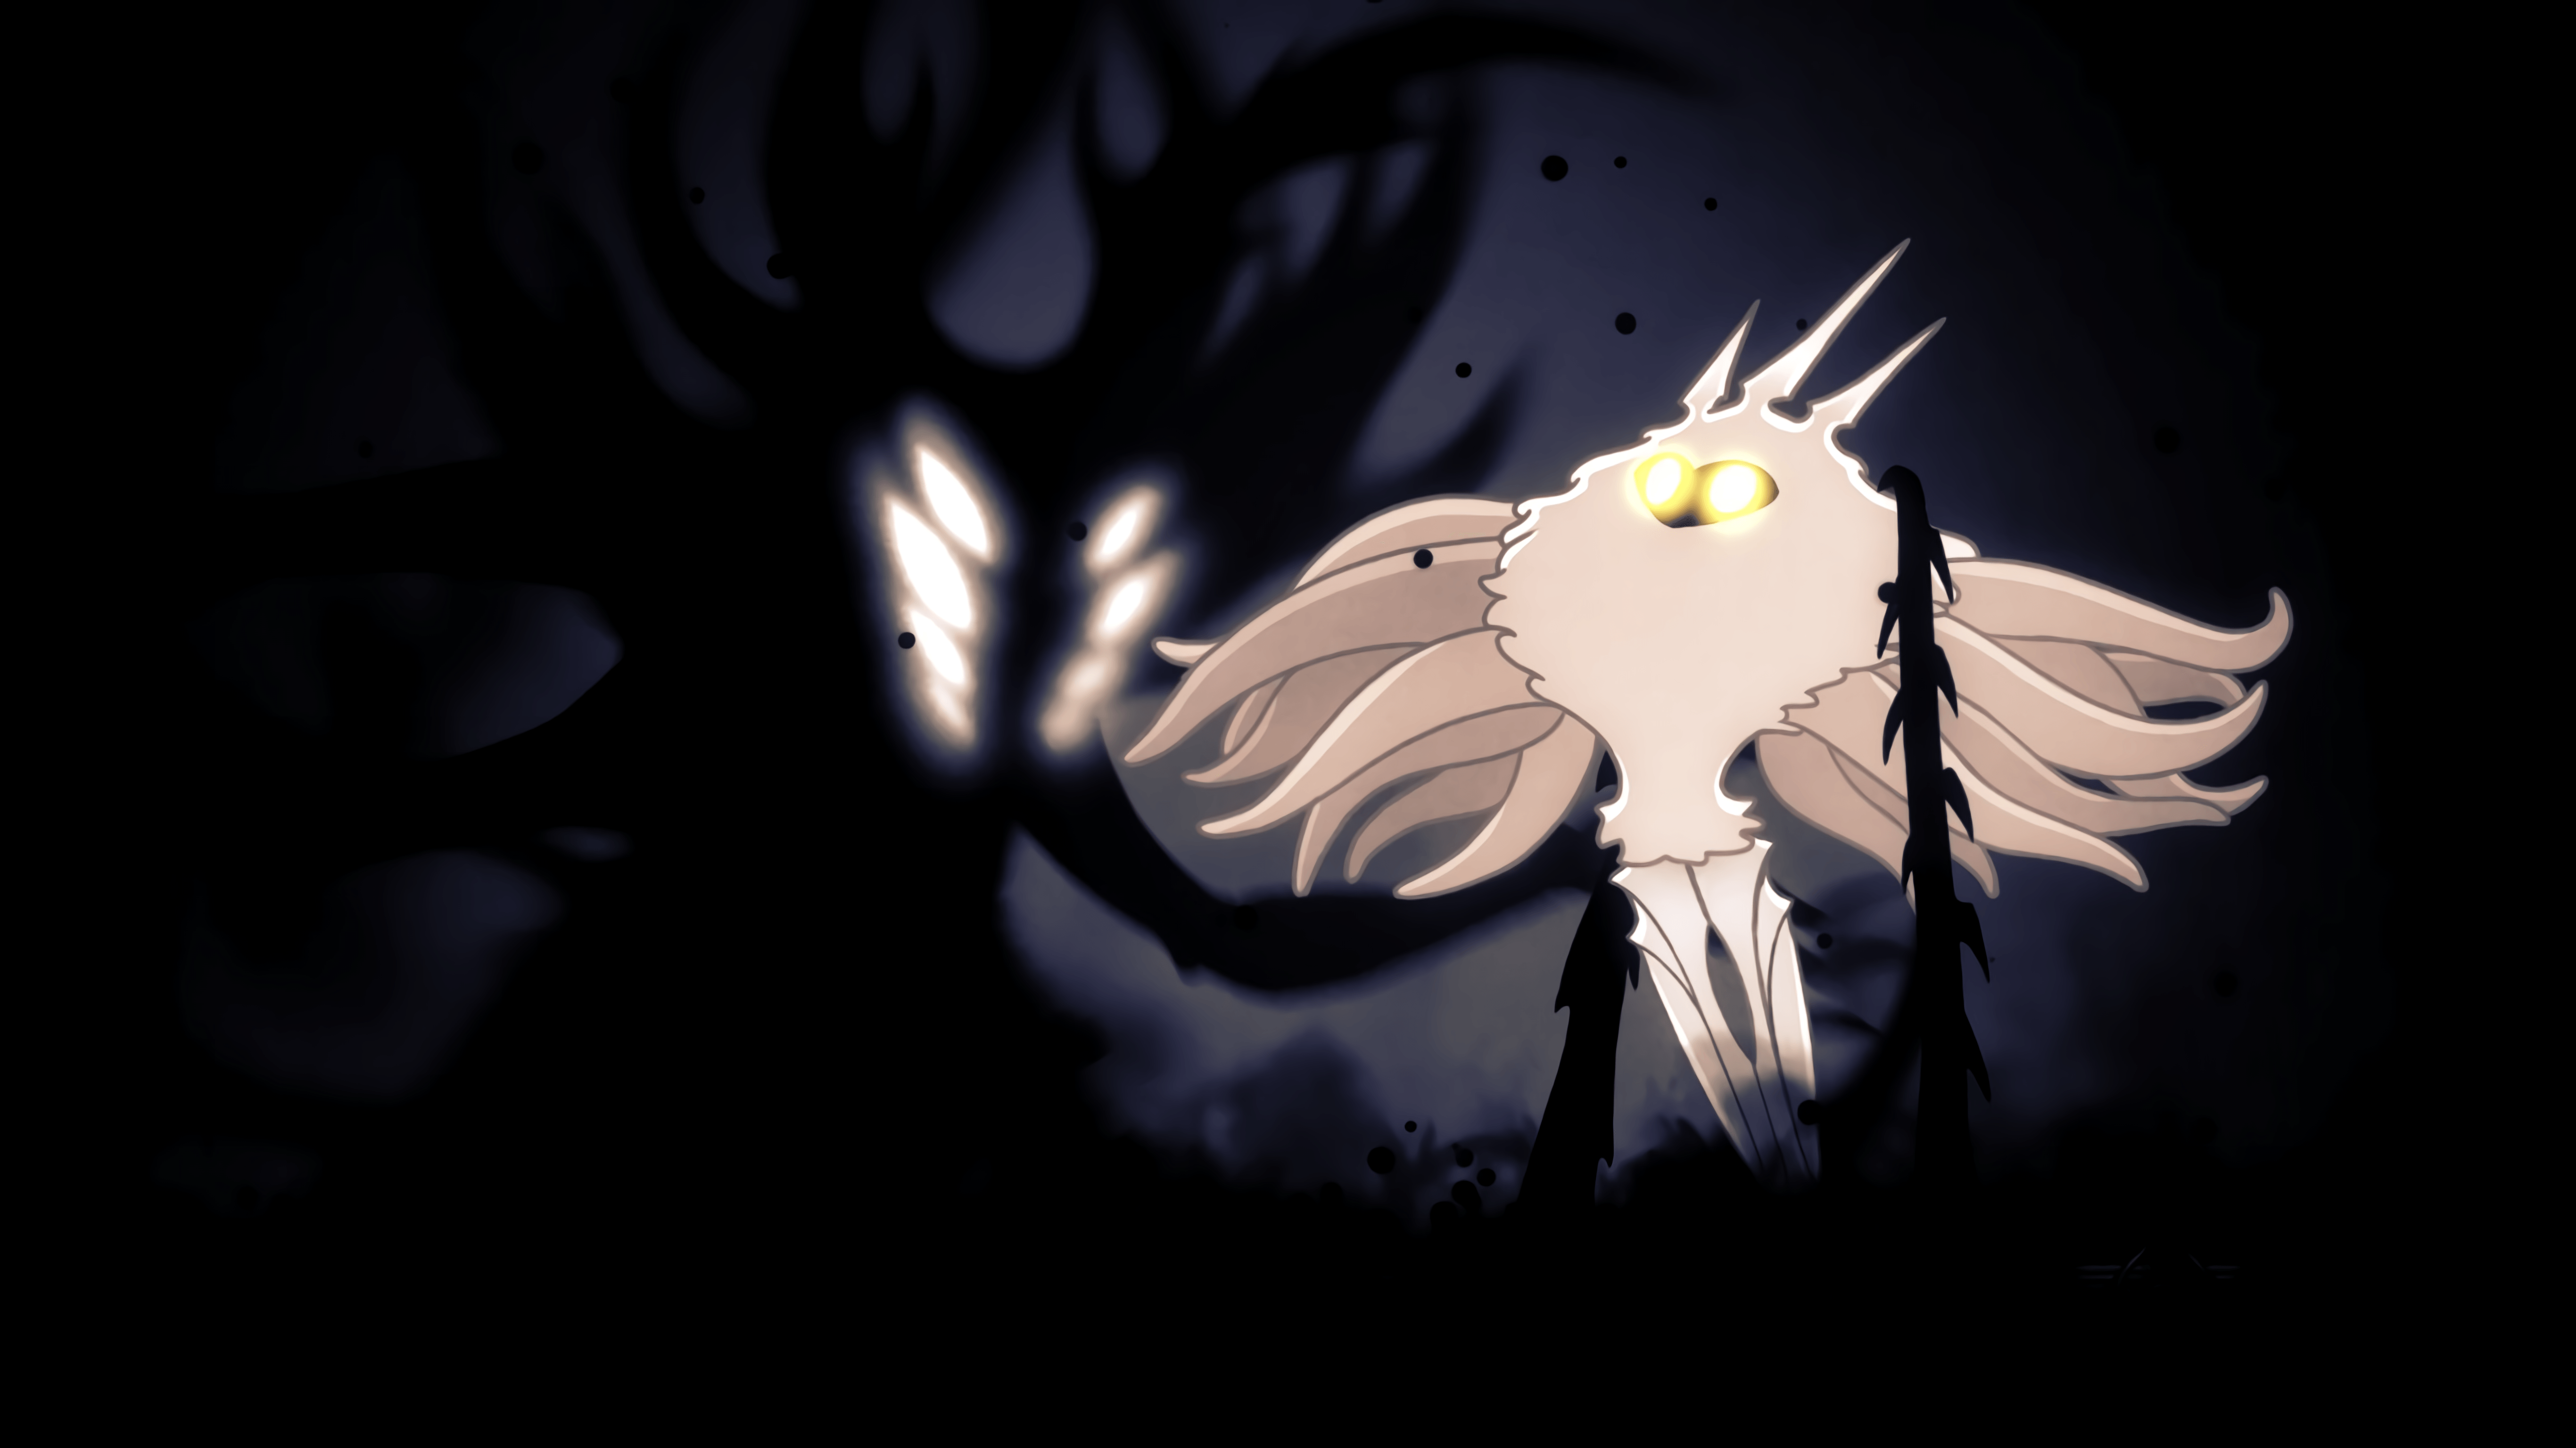 General 5464x3072 Hollow Knight Radiance shade lord video games metroidvania creature glowing eyes dark video game art silhouette